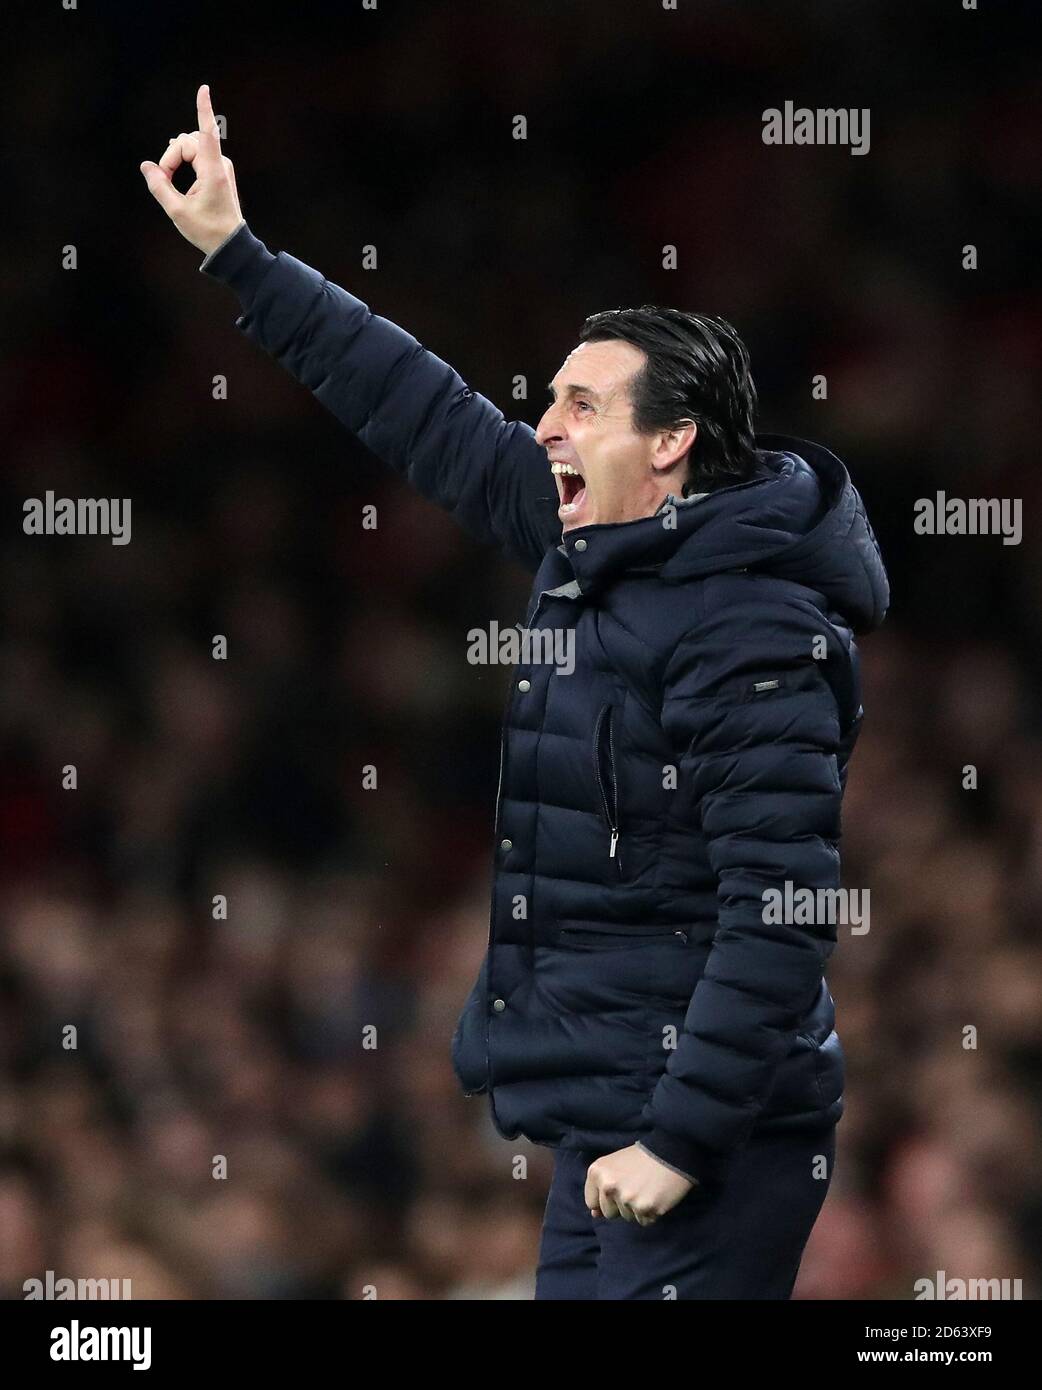 Arsenal manager Unai Emery gestures on the touchline Stock Photo